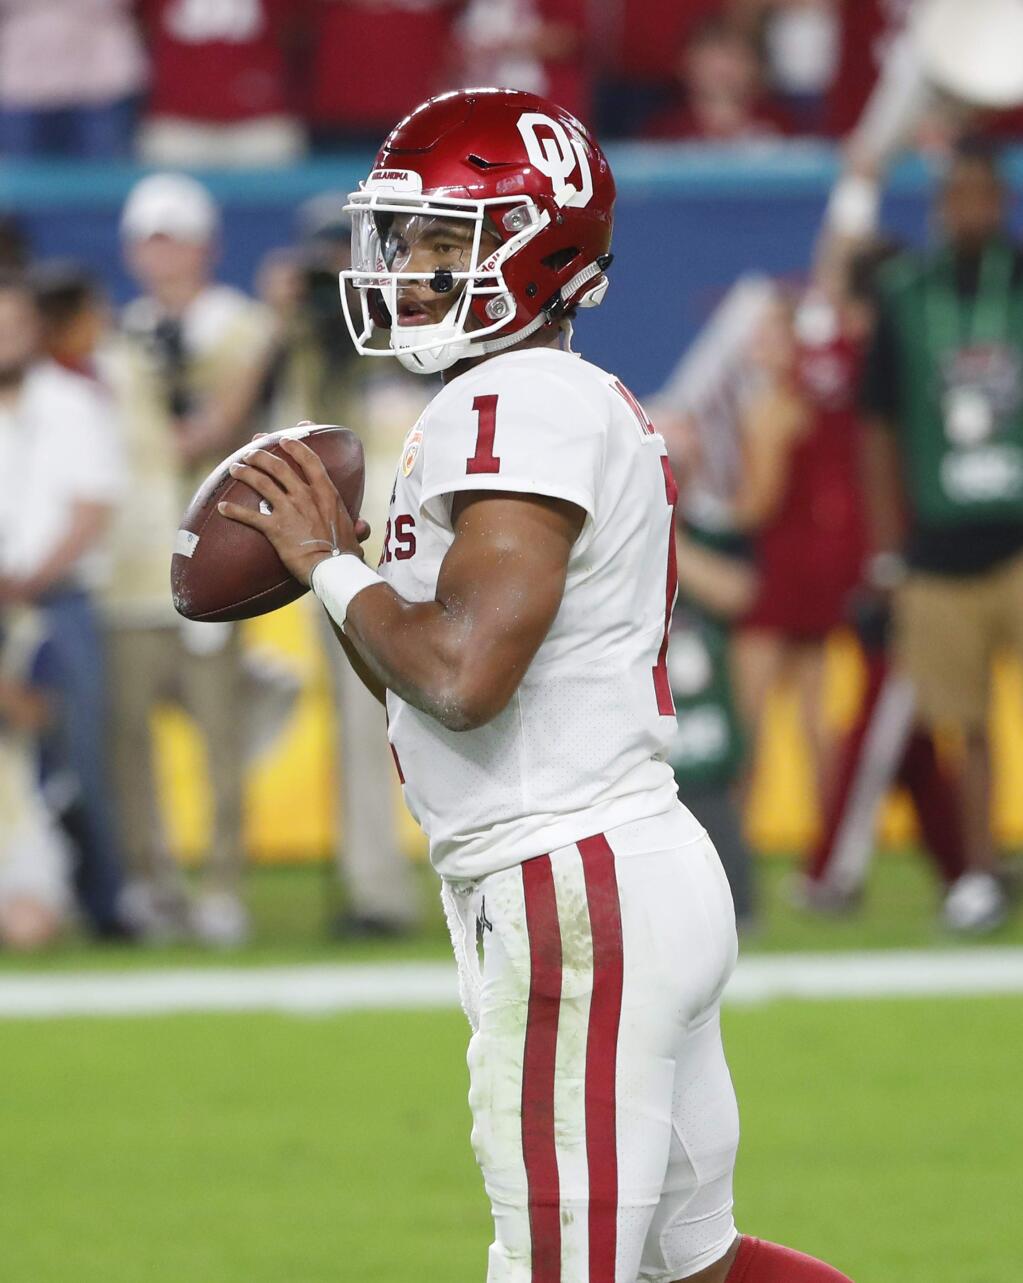 Oklahoma quarterback Kyler Murray (1) looks to pass, during the first half of the Orange Bowl NCAA college football game against Alabama, Saturday, Dec. 29, 2018, in Miami Gardens, Fla. (AP Photo/Wilfredo Lee)